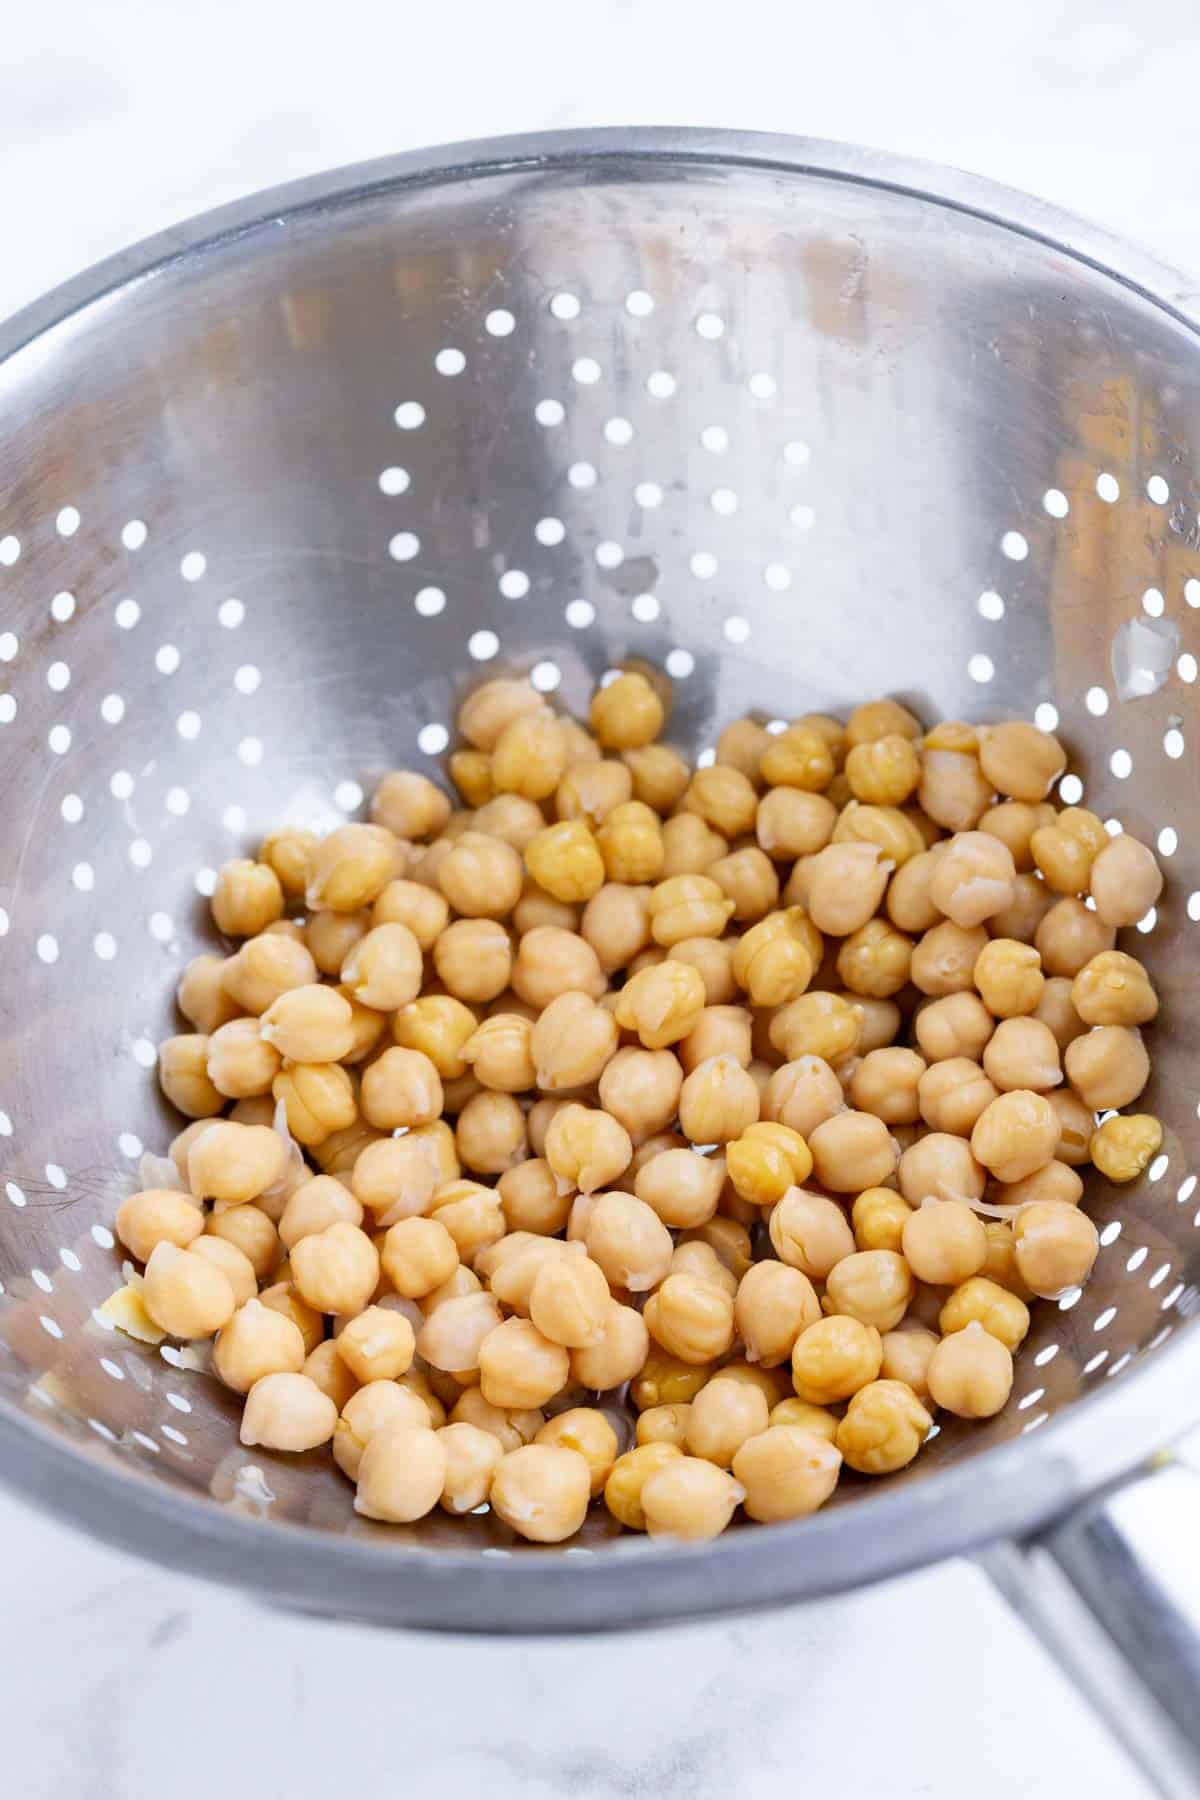 Chickpeas are drained in a colander.